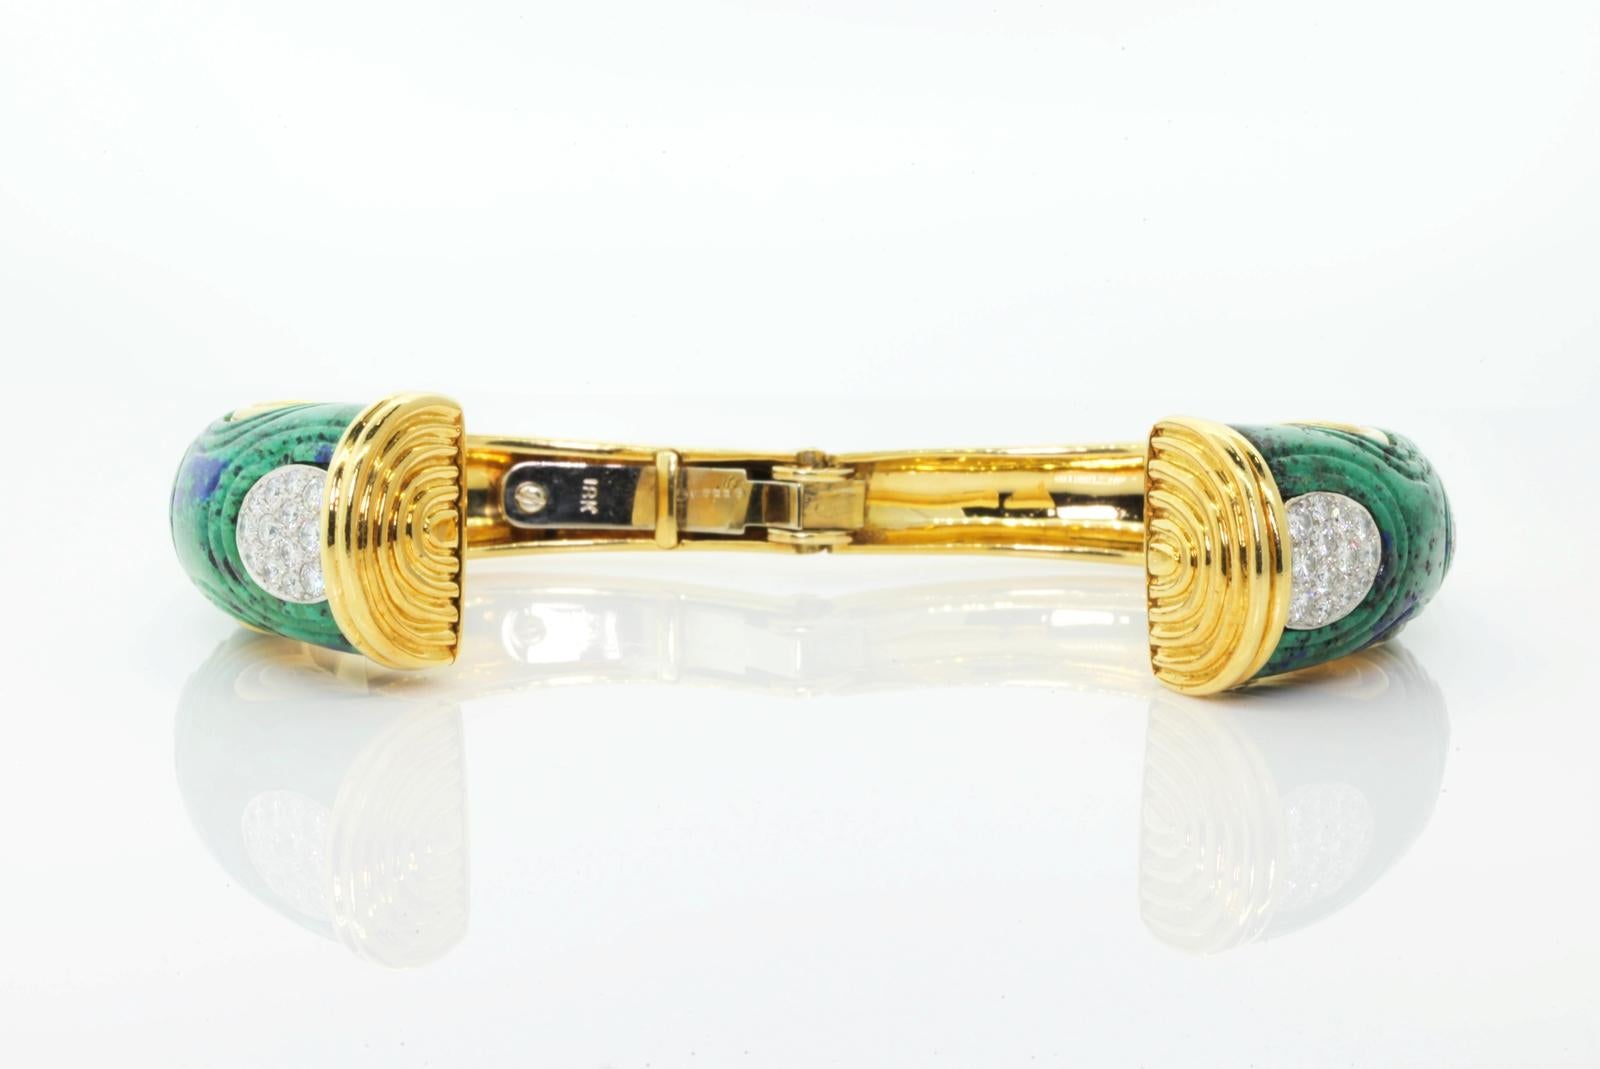 Beautiful and unusual 18KT yellow gold David Webb bangle bracelet.  Two carved domed Azurmalachite stones comprise the top of the bracelet, each set with platinum approximately 2.40 carat of Round Diamond pave insets.  The Azurmalachites are carved